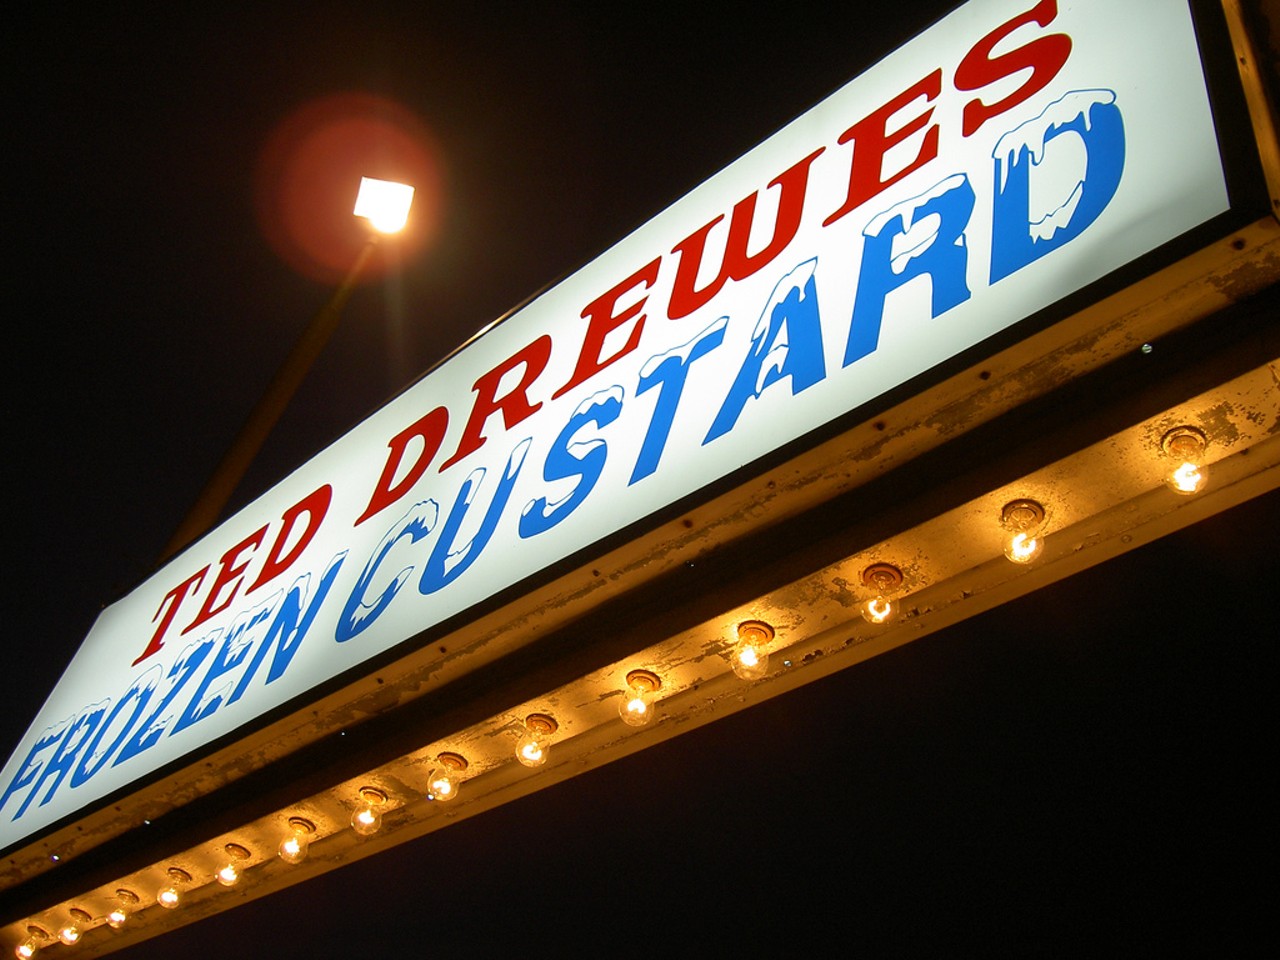 5. The first St. Louis Ted Drewes location stood between a Shell station and a watermelon stand.
Photo courtesy of prettywar-stl / Flickr